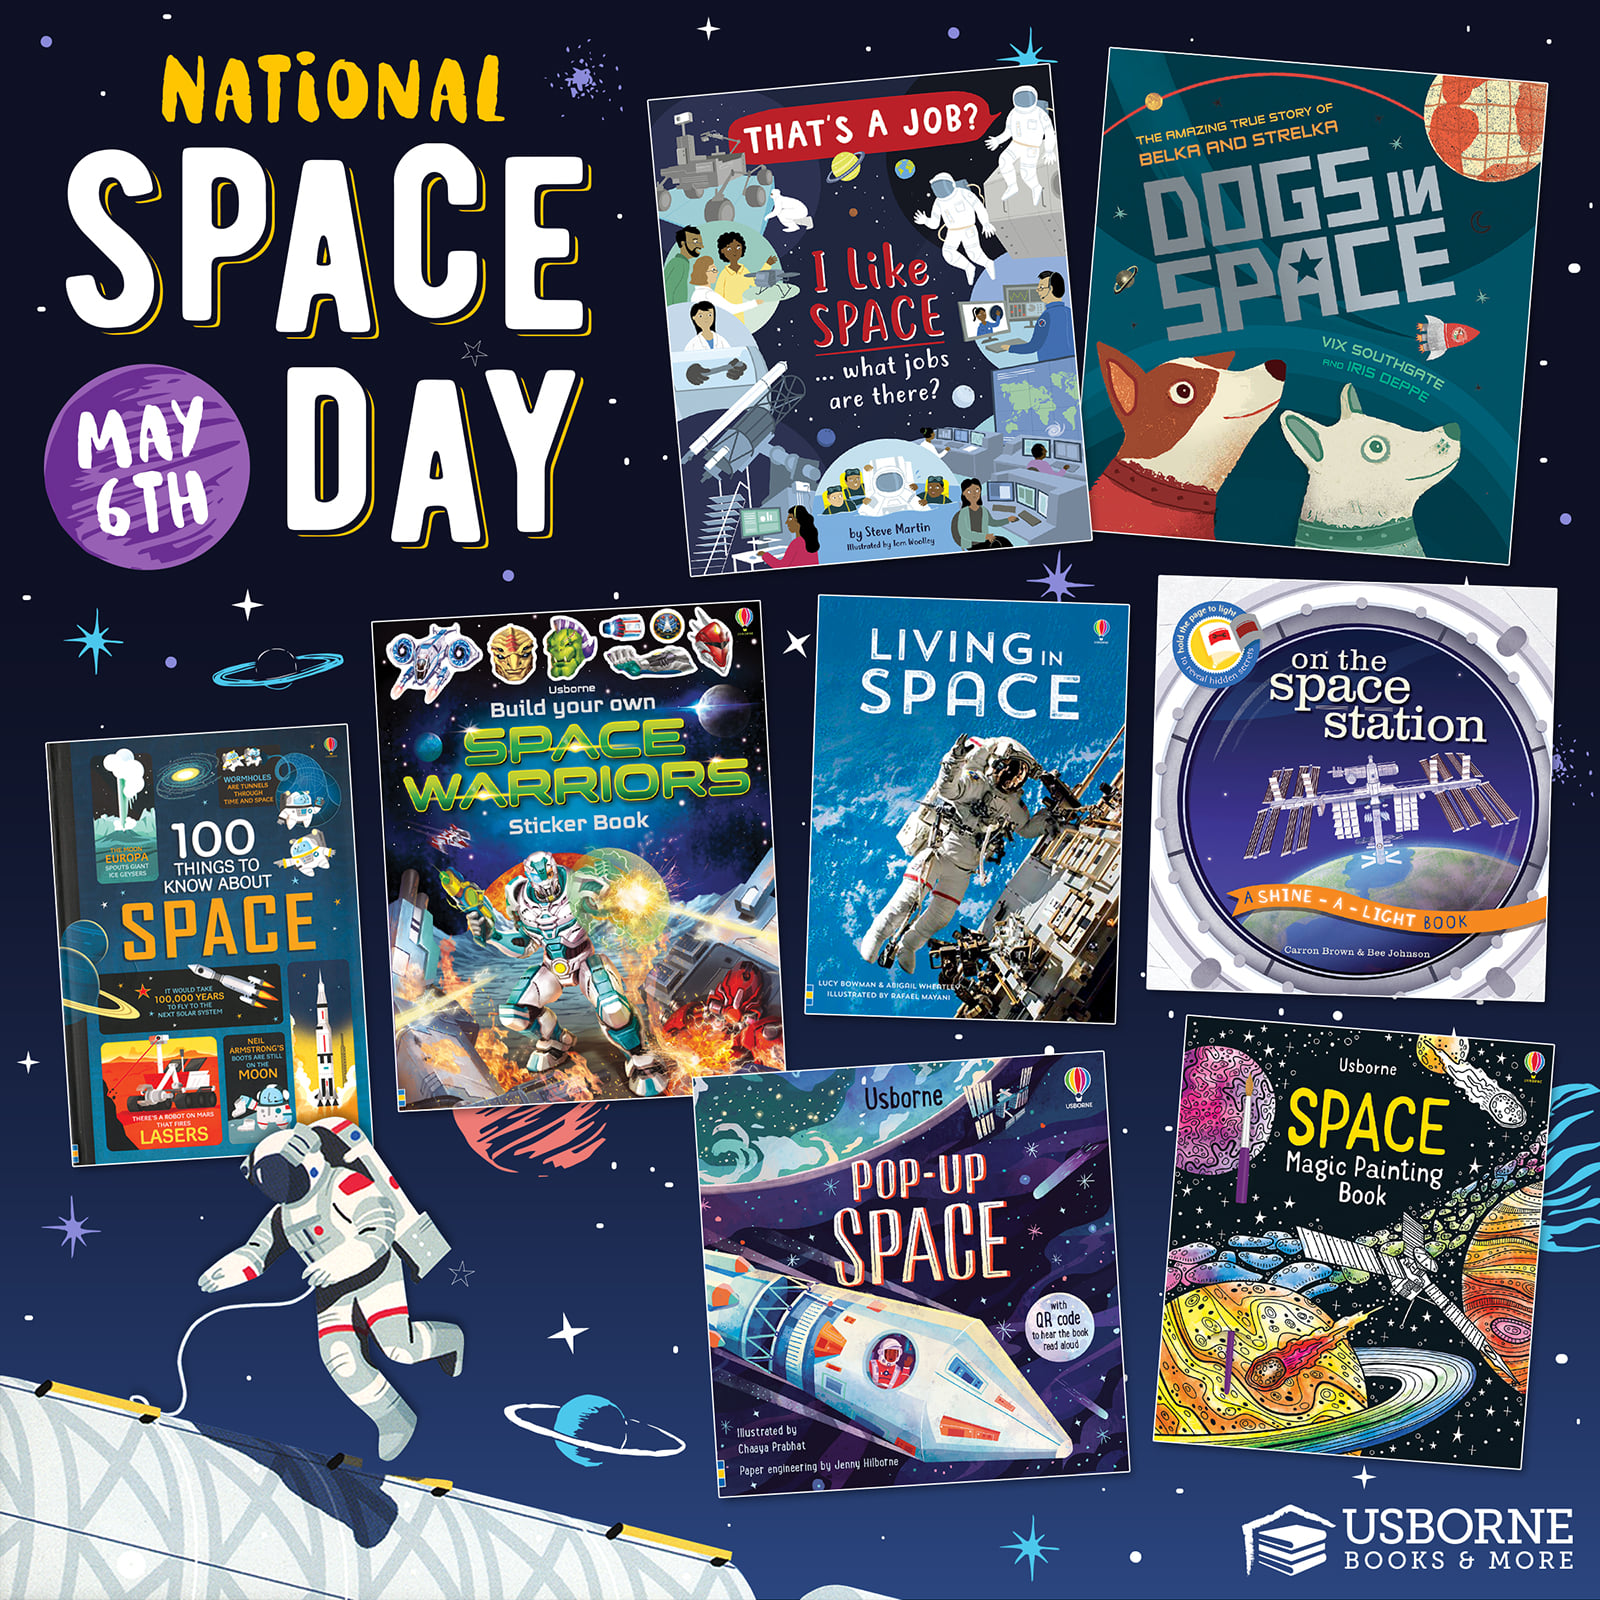 National Space Day - May 6